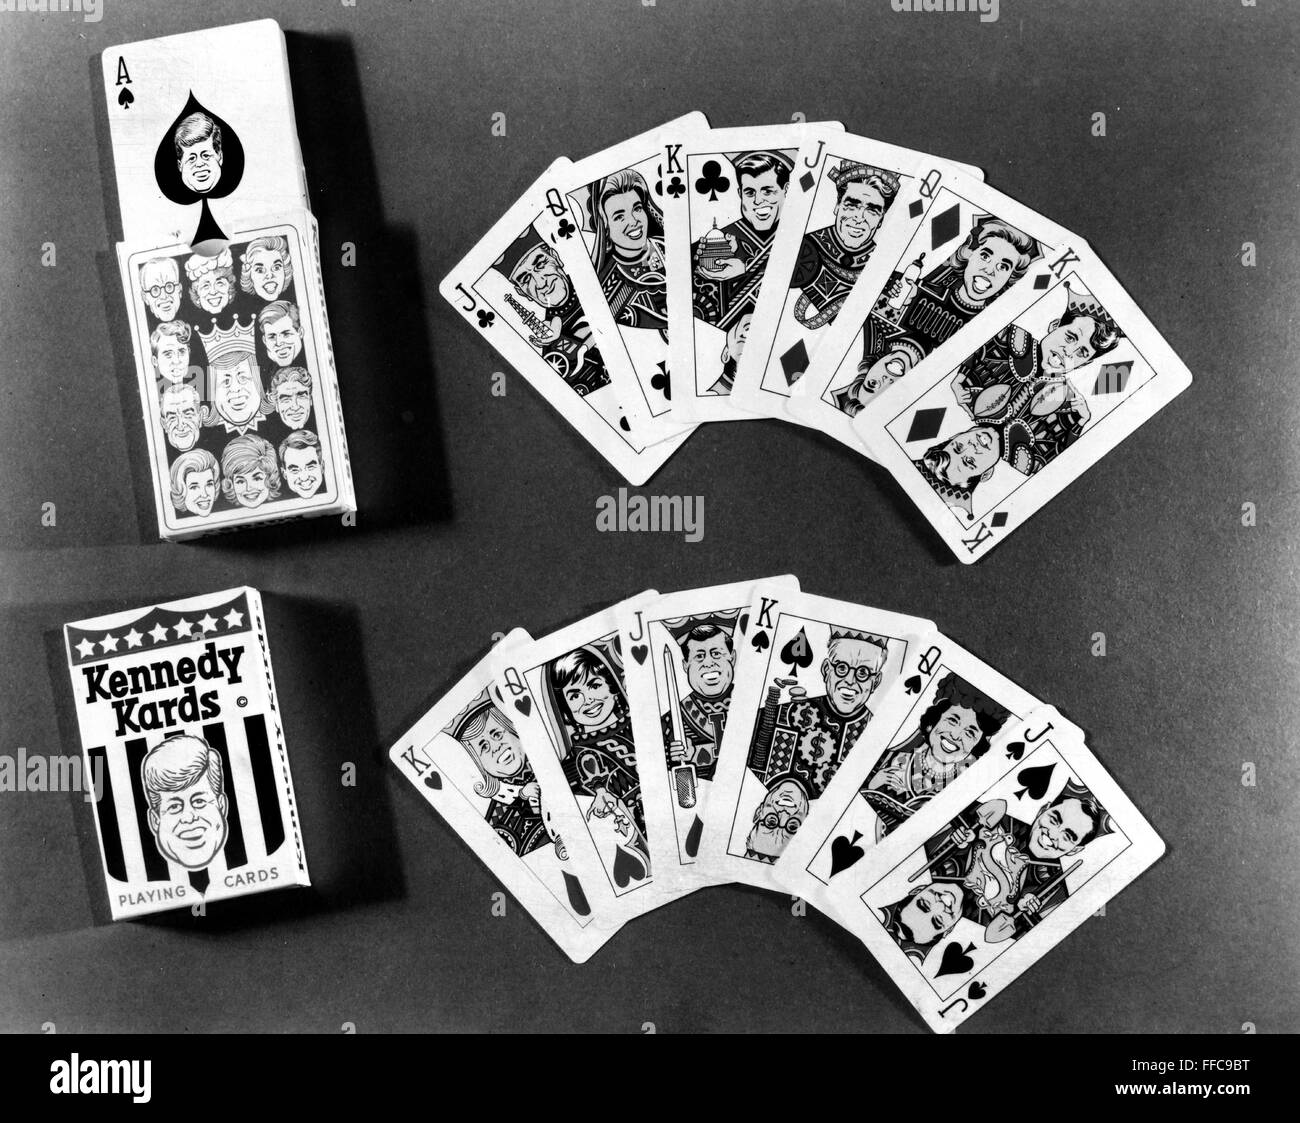 JFK: PLAYING CARDS. /nKennedy Kards, featuring members of President John F. Kennedy's family and administration. Photographed c1960. Stock Photo